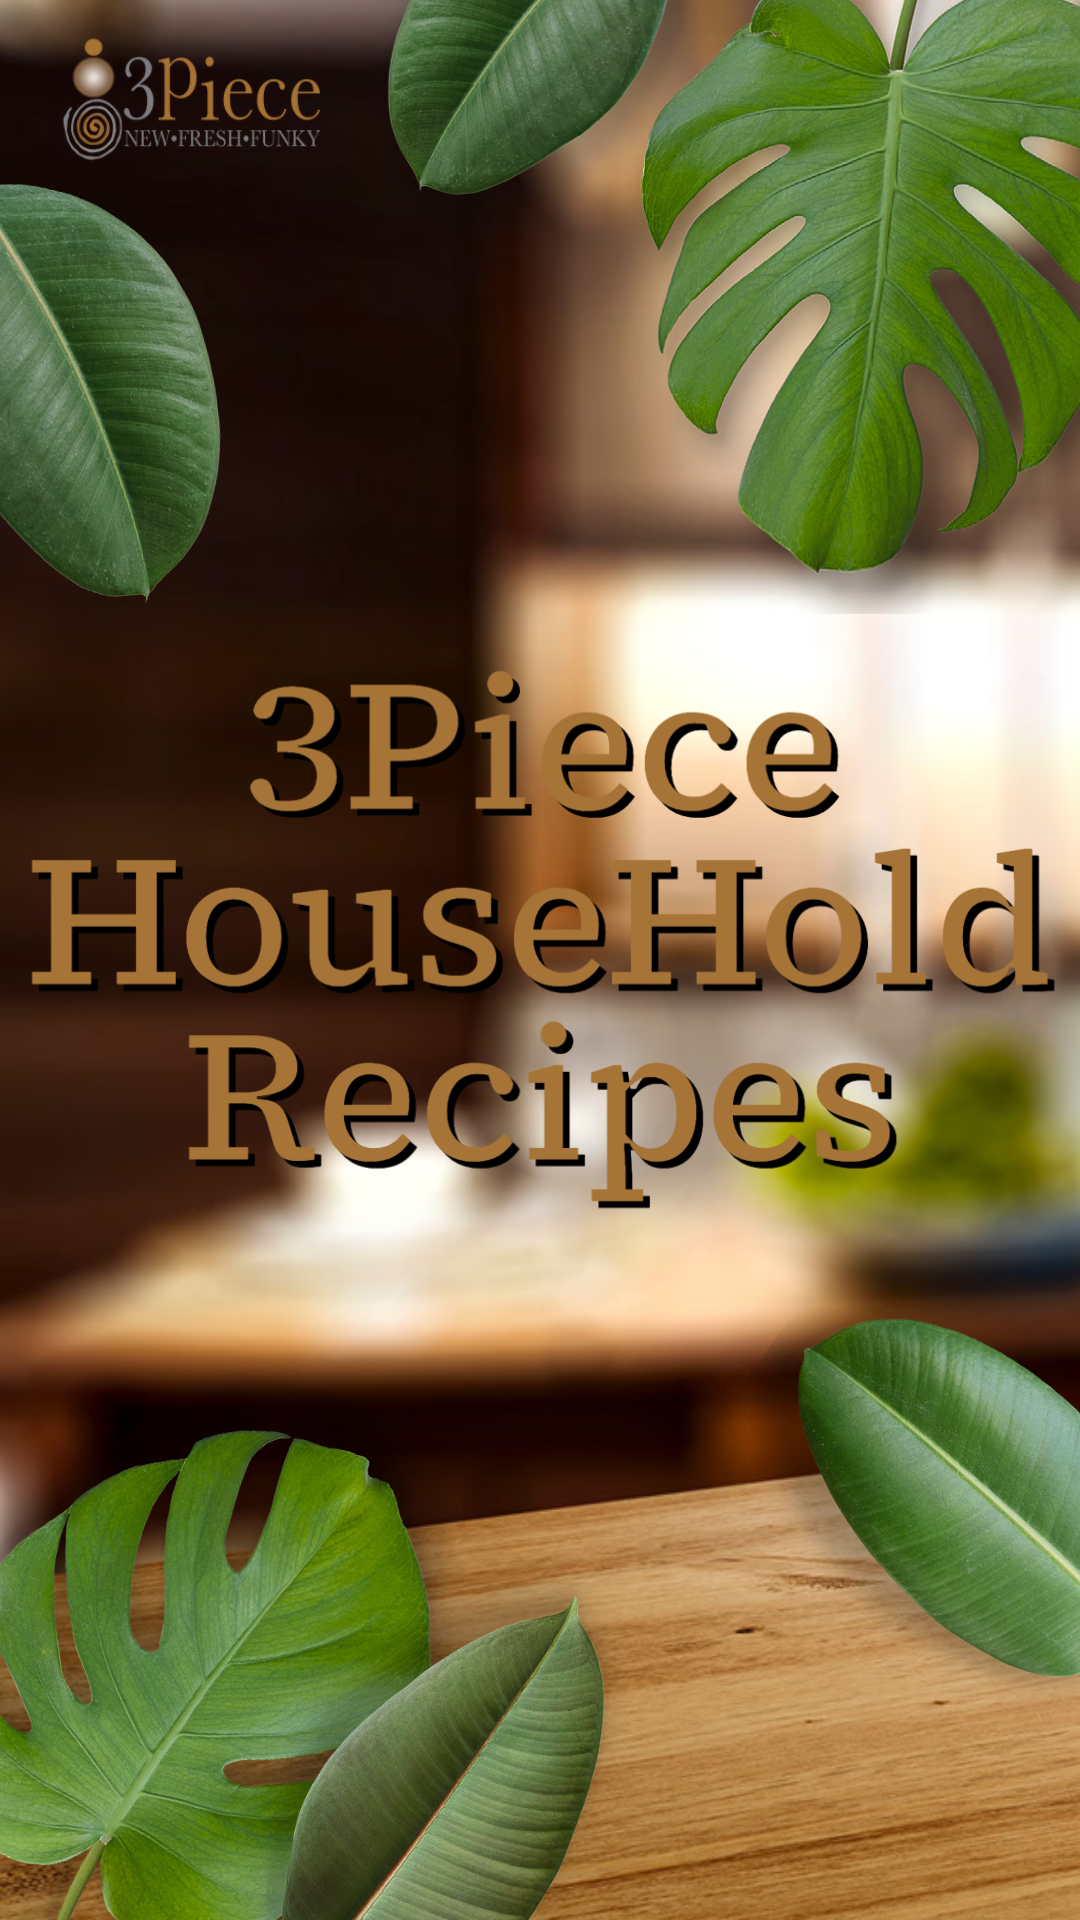 3 Piece Household Recipes: Disinfectant Spray